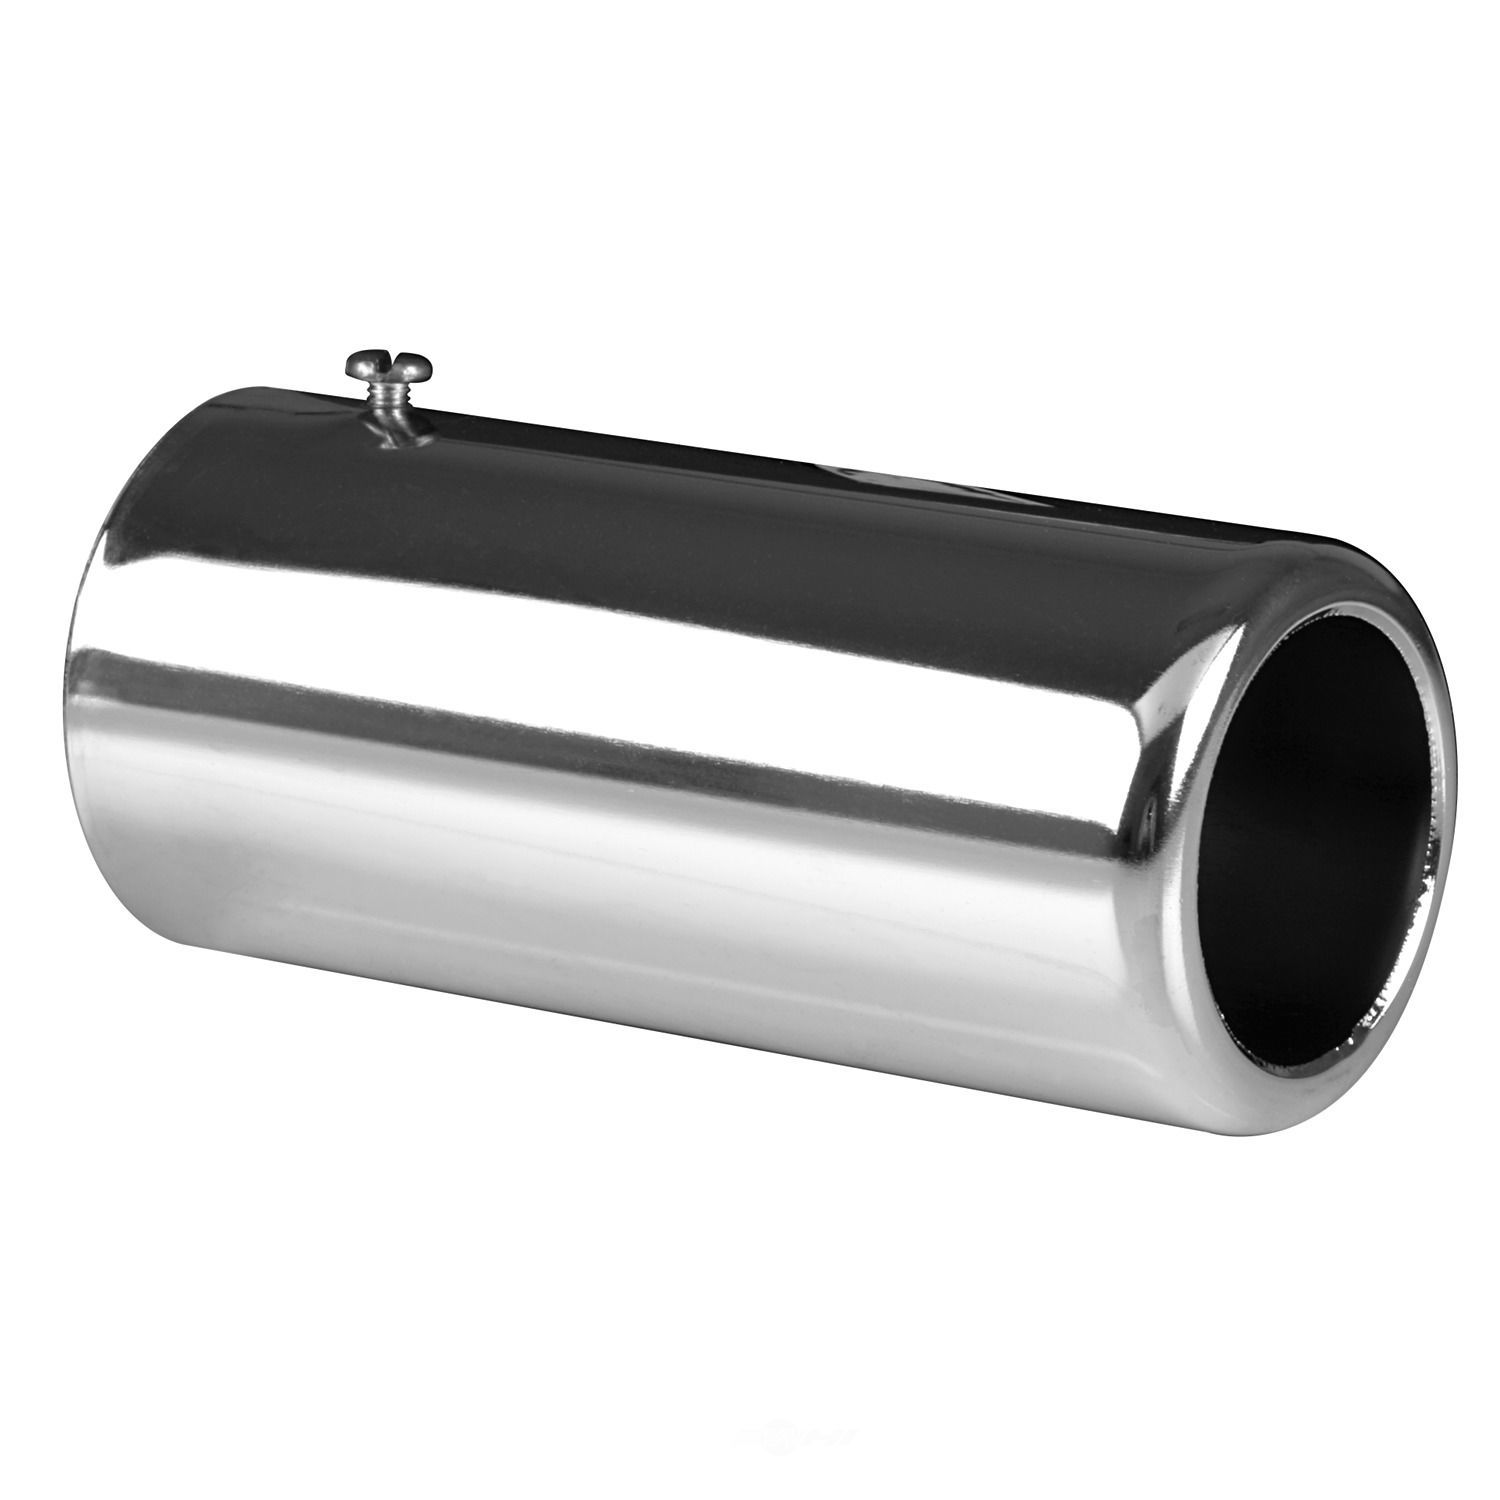 AP EXHAUST W/FEDERAL CONVERTER - Exhaust Tail Pipe Tip - APF 9817